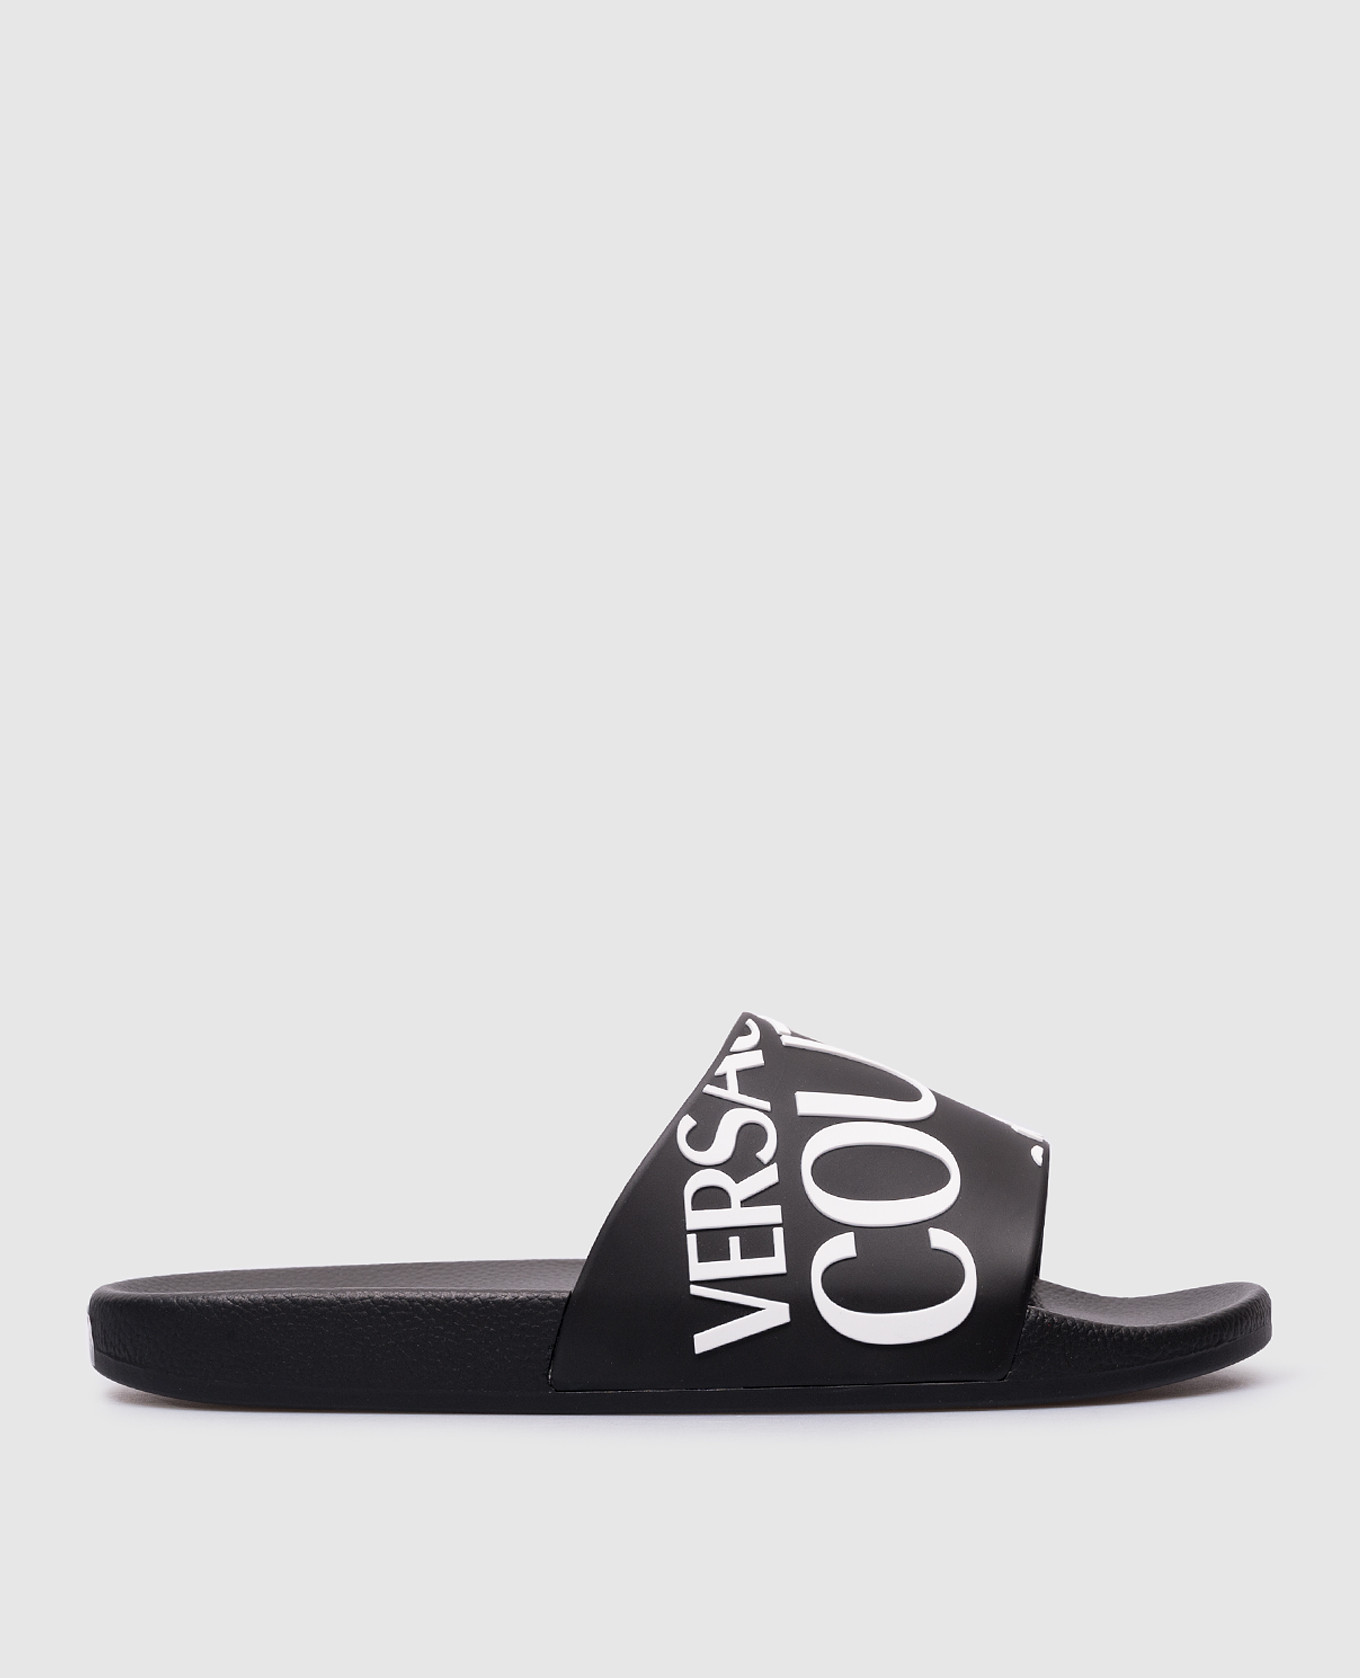 Black sliders with textured logo